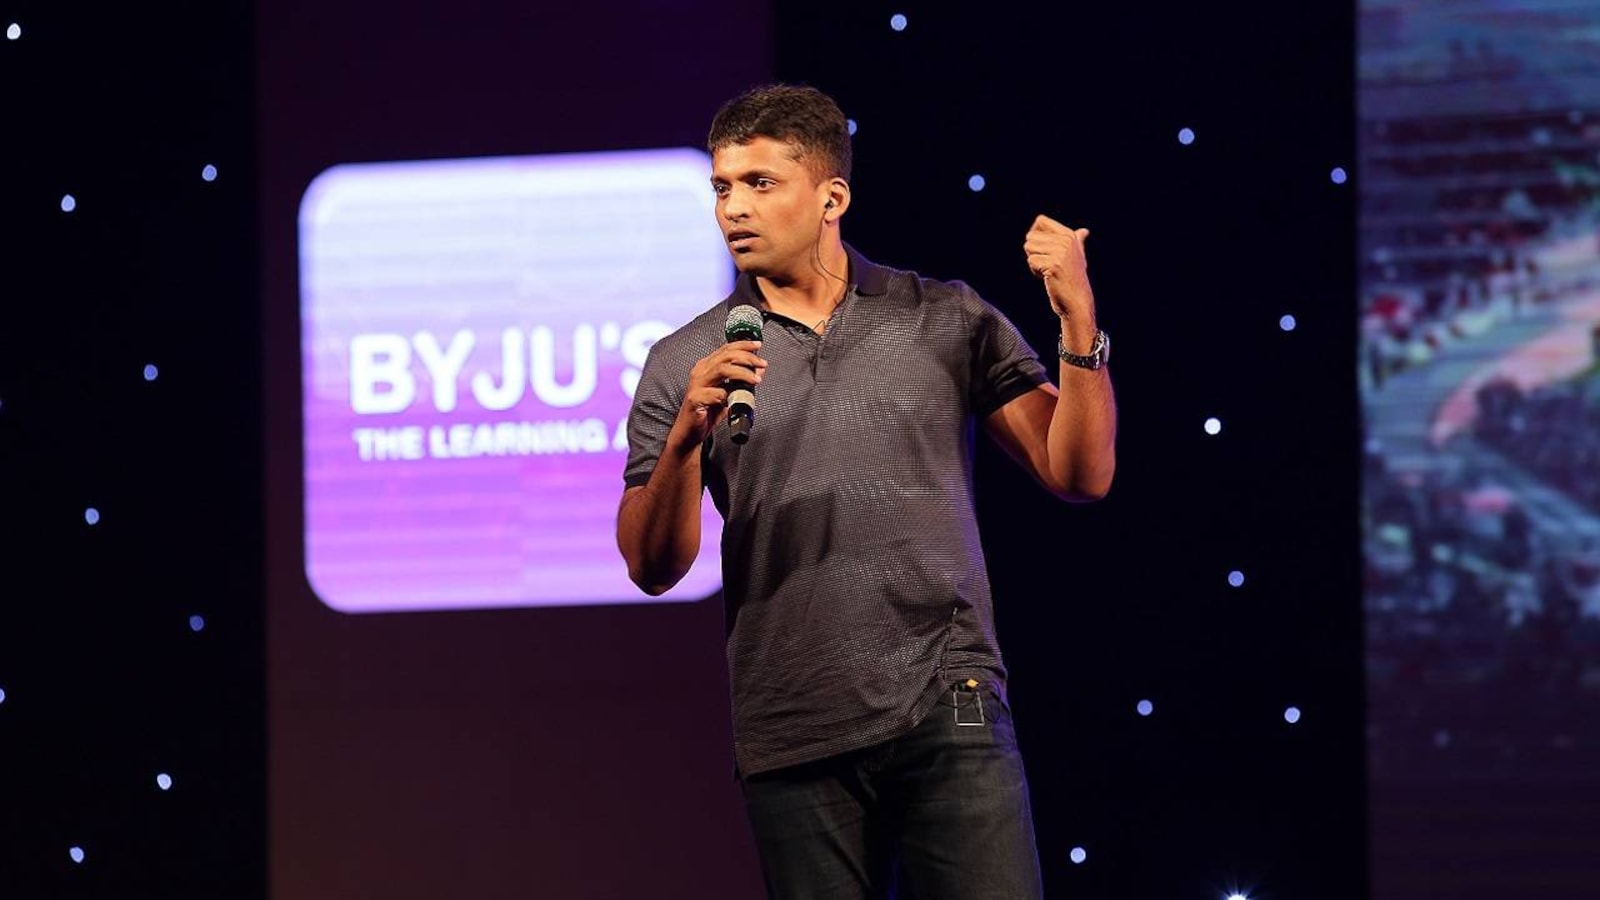 Byju's journey - From India's most funded ed-tech startup to a Harvard case  study